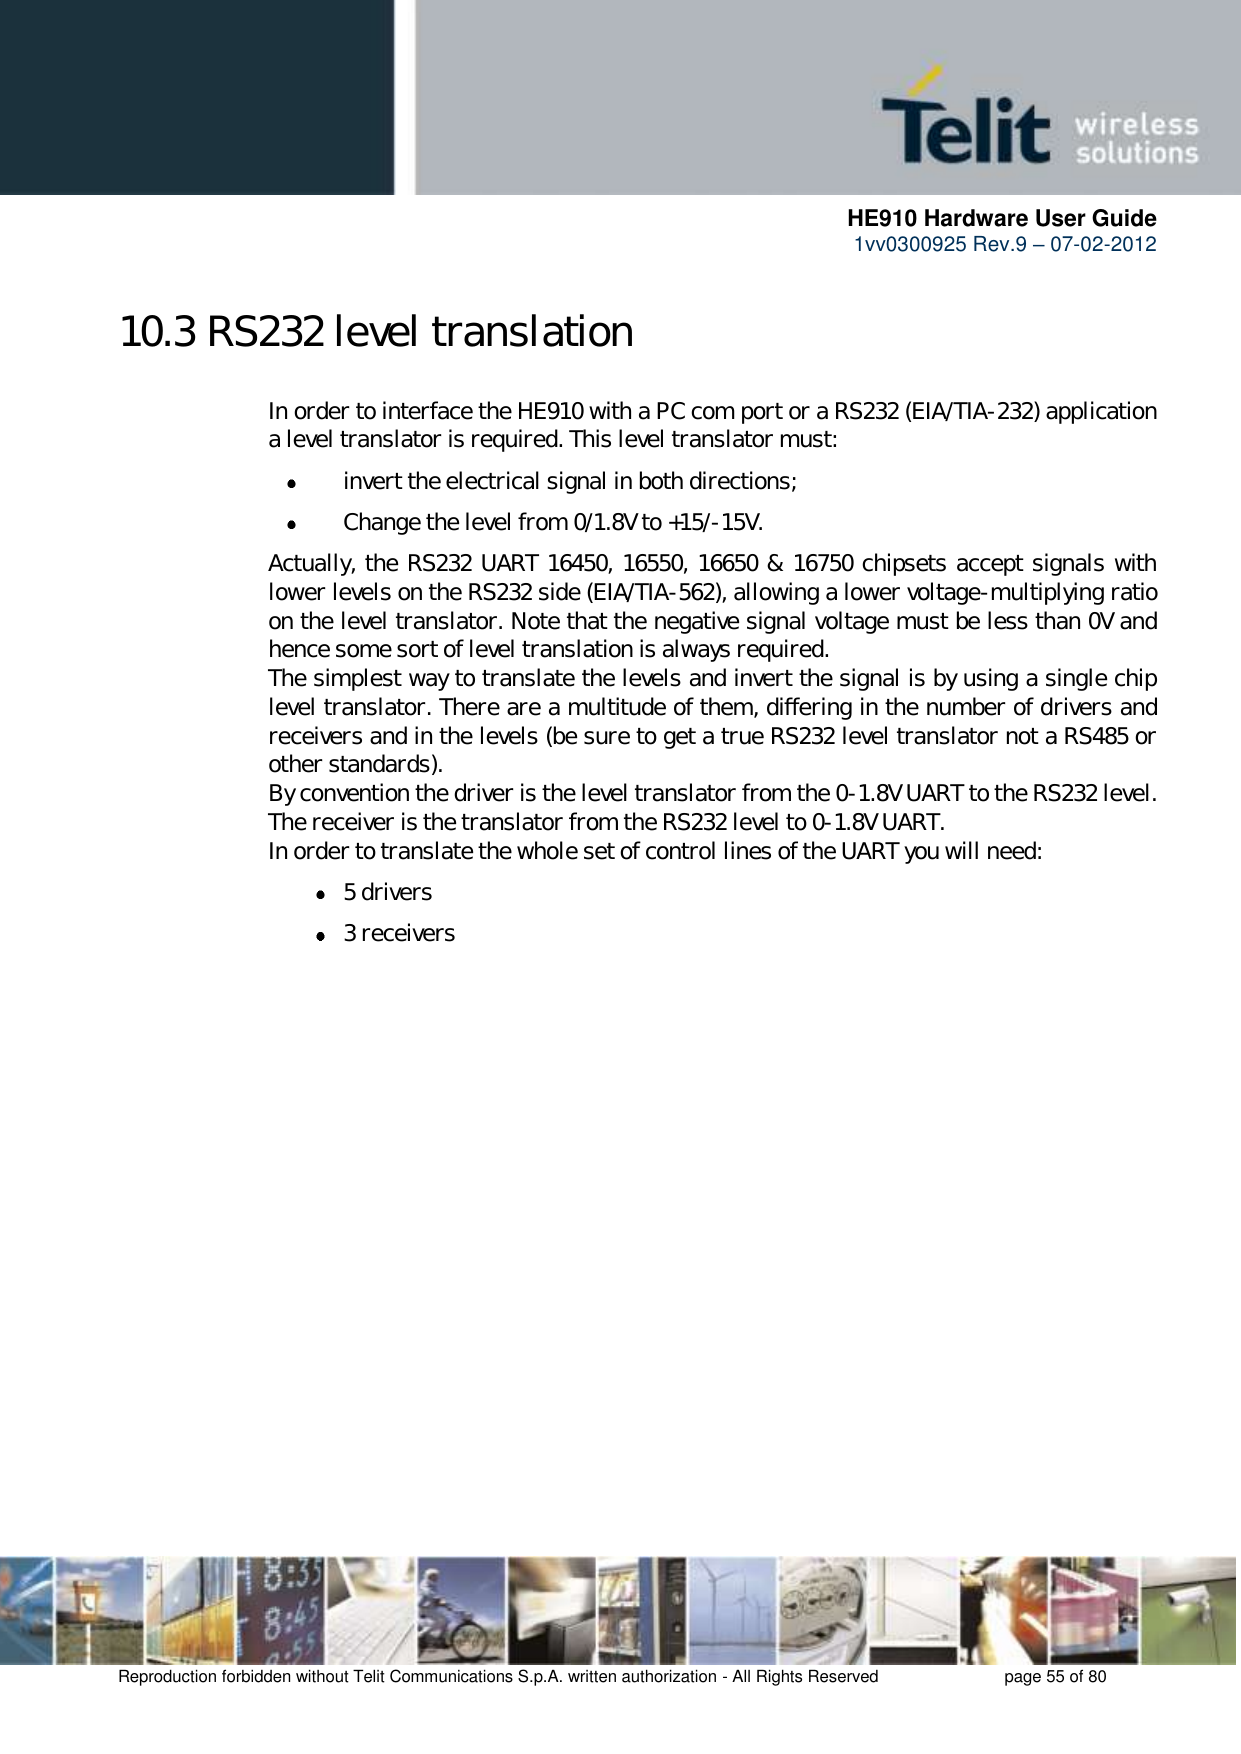      HE910 Hardware User Guide 1vv0300925 Rev.9 – 07-02-2012    Reproduction forbidden without Telit Communications S.p.A. written authorization - All Rights Reserved    page 55 of 80  10.3 RS232 level translation In order to interface the HE910 with a PC com port or a RS232 (EIA/TIA-232) application a level translator is required. This level translator must:  invert the electrical signal in both directions;  Change the level from 0/1.8V to +15/-15V. Actually, the RS232 UART 16450, 16550, 16650 &amp; 16750 chipsets accept signals with lower levels on the RS232 side (EIA/TIA-562), allowing a lower voltage-multiplying ratio on the level translator. Note that the negative signal voltage must be less than 0V and hence some sort of level translation is always required.  The simplest way to translate the levels and invert the signal is by using a single chip level translator. There are a multitude of them, differing in the number of drivers and receivers and in the levels (be sure to get a true RS232 level translator not a RS485 or other standards). By convention the driver is the level translator from the 0-1.8V UART to the RS232 level. The receiver is the translator from the RS232 level to 0-1.8V UART. In order to translate the whole set of control lines of the UART you will need:  5 drivers  3 receivers 